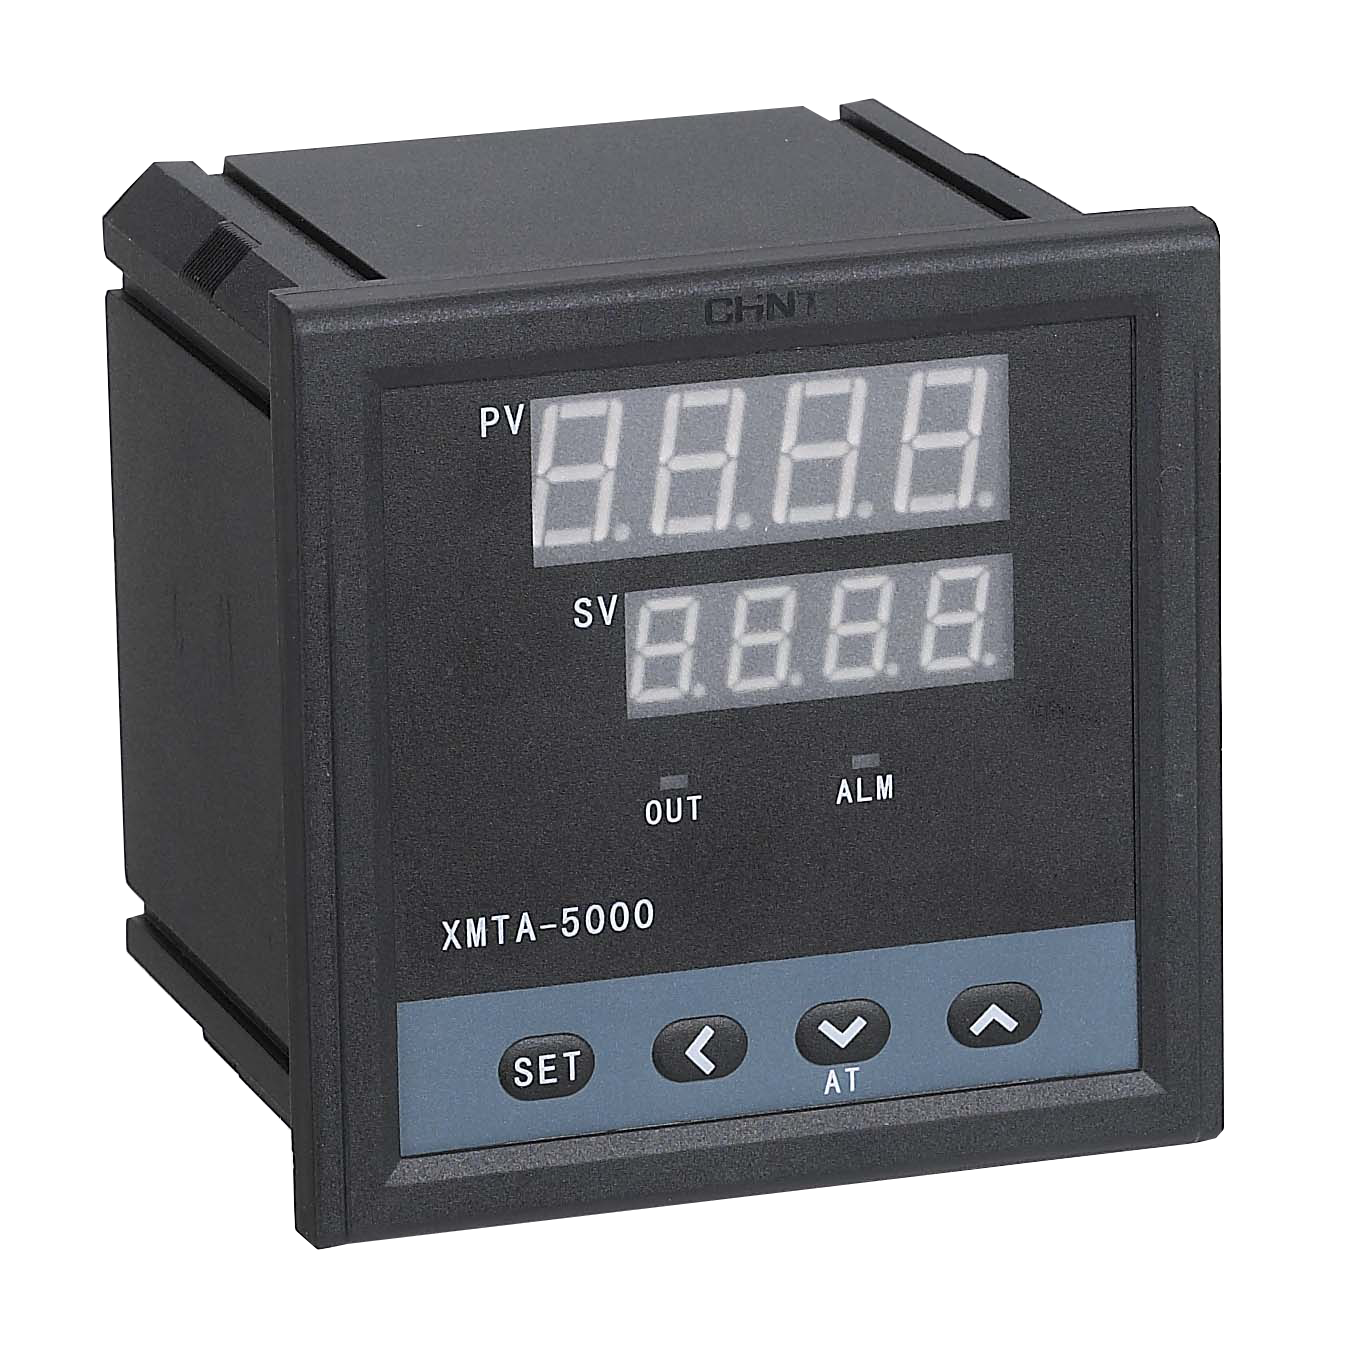 XMT-5000 series digital indicating controllers